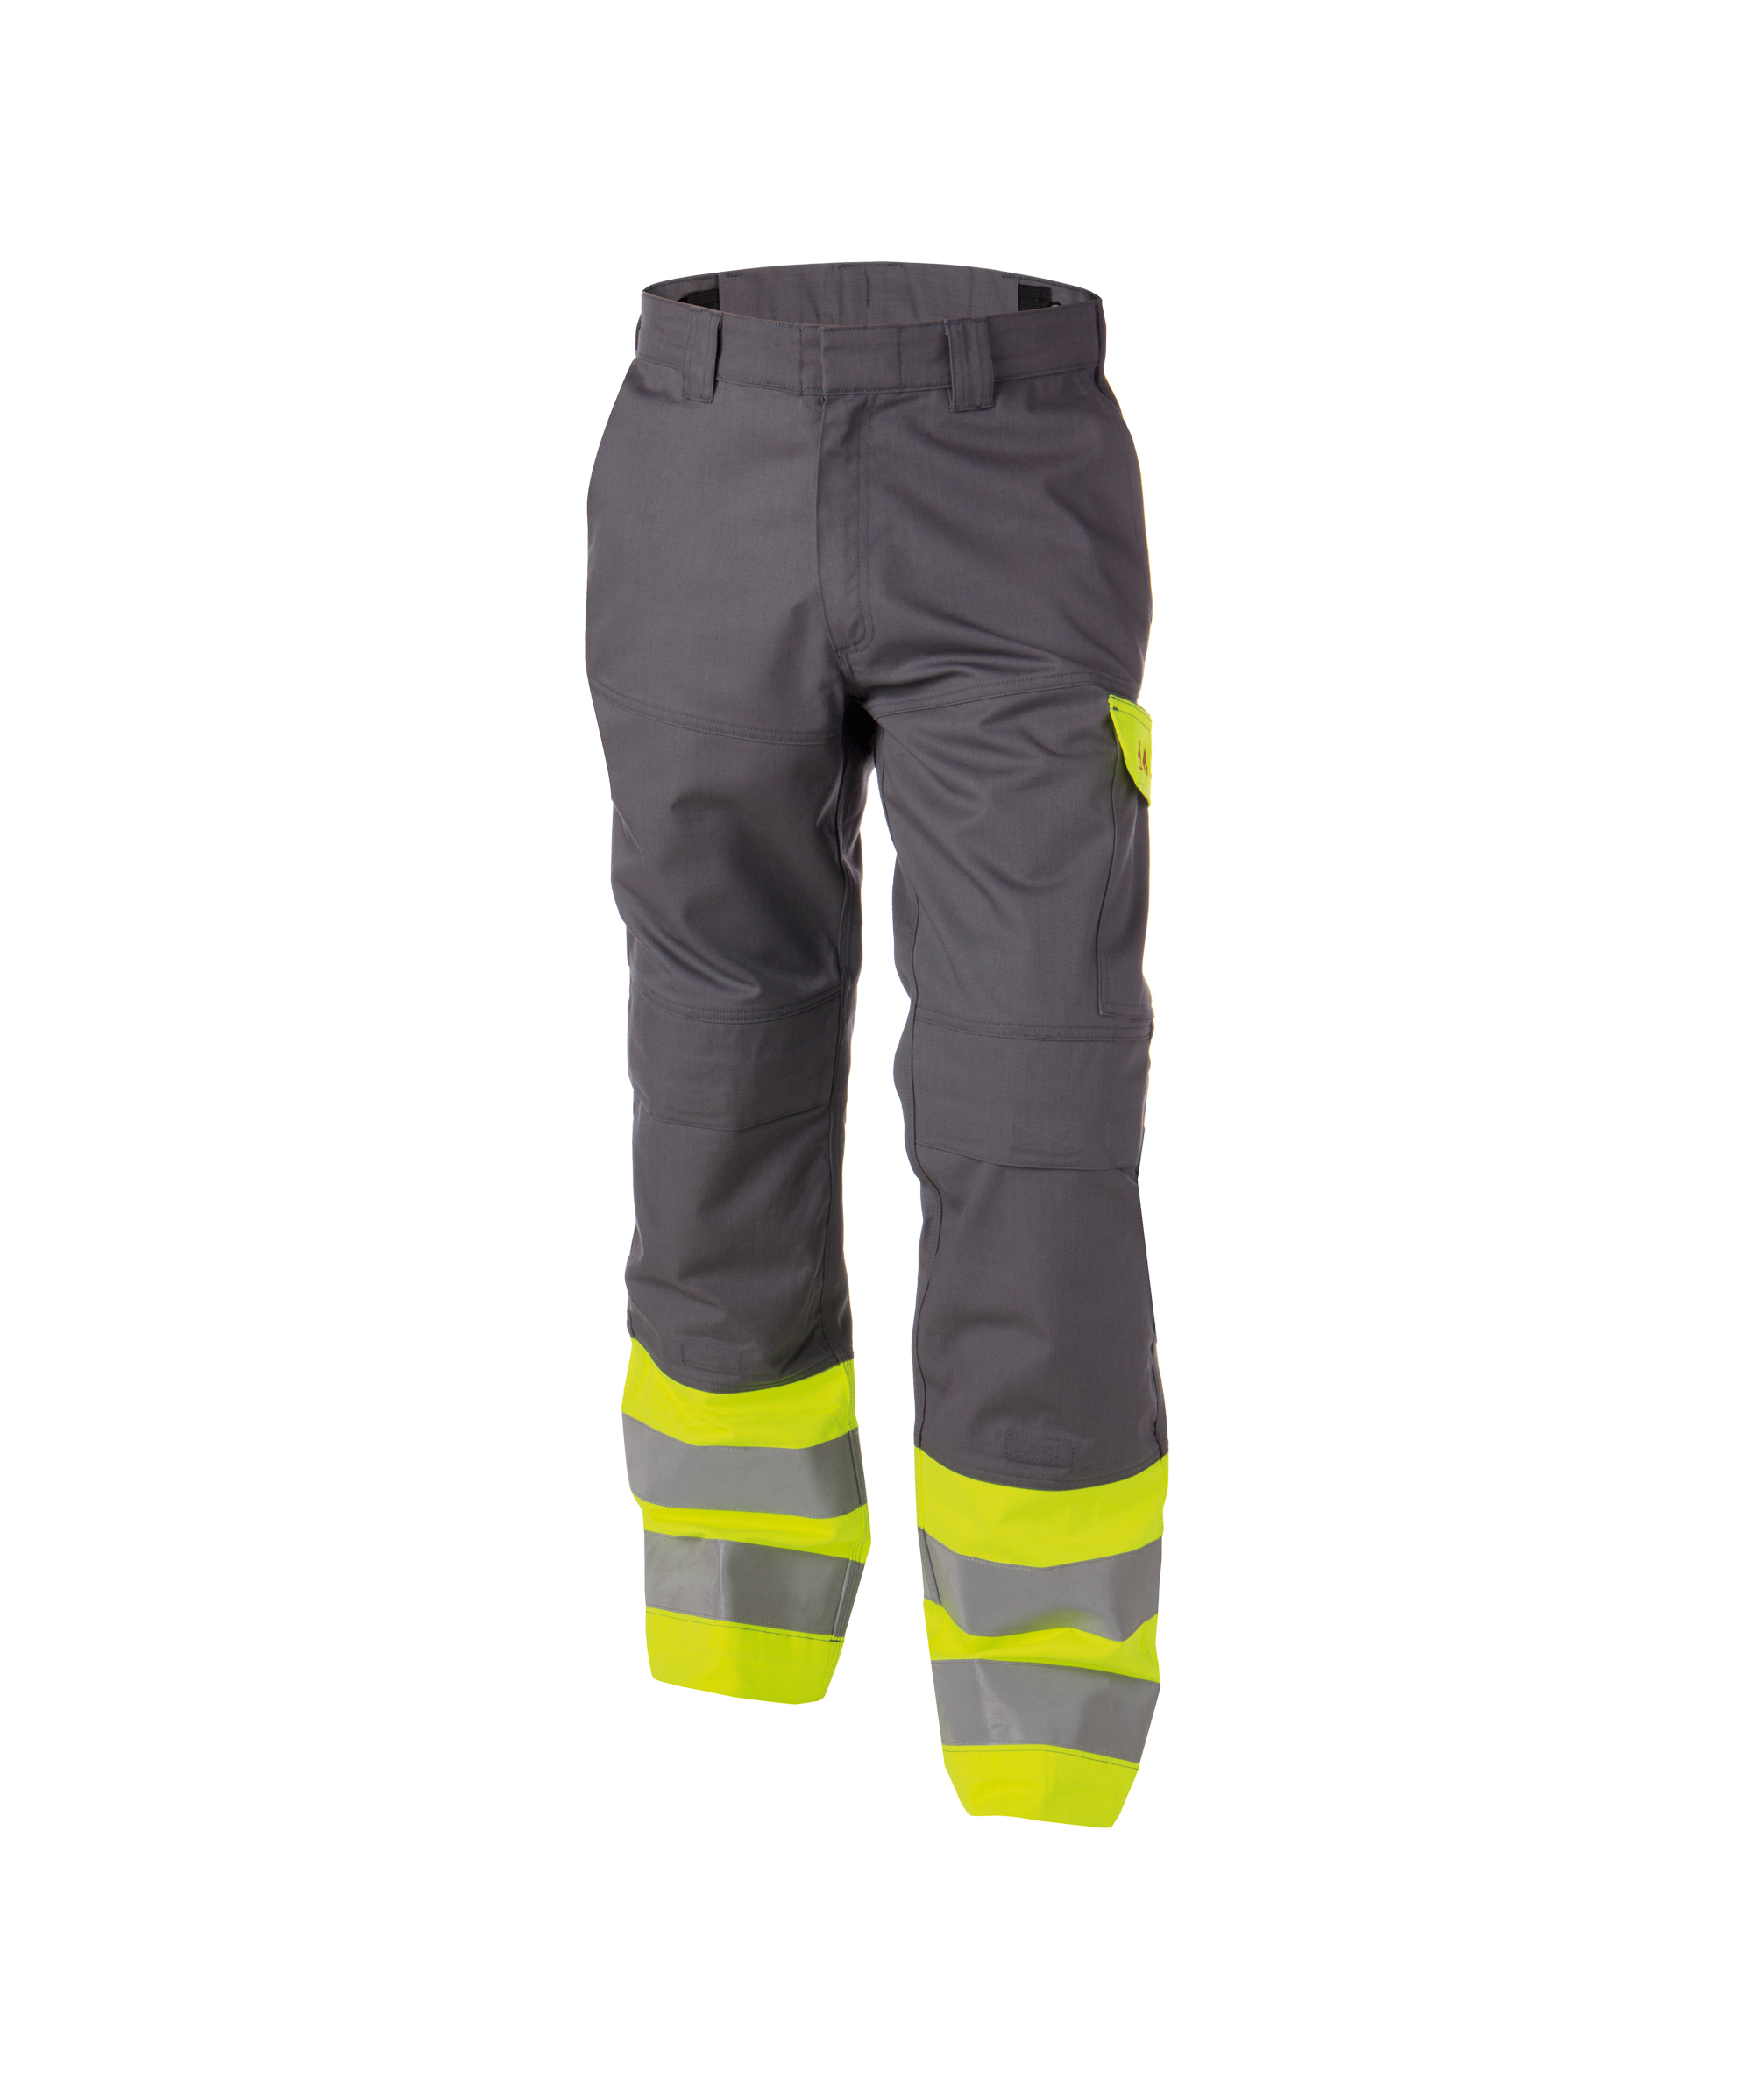 lenox_two-tone-multinorm-high-visibilty-work-trousers-with-knee-pockets_graphite-grey-fluo-yellow_front.jpg